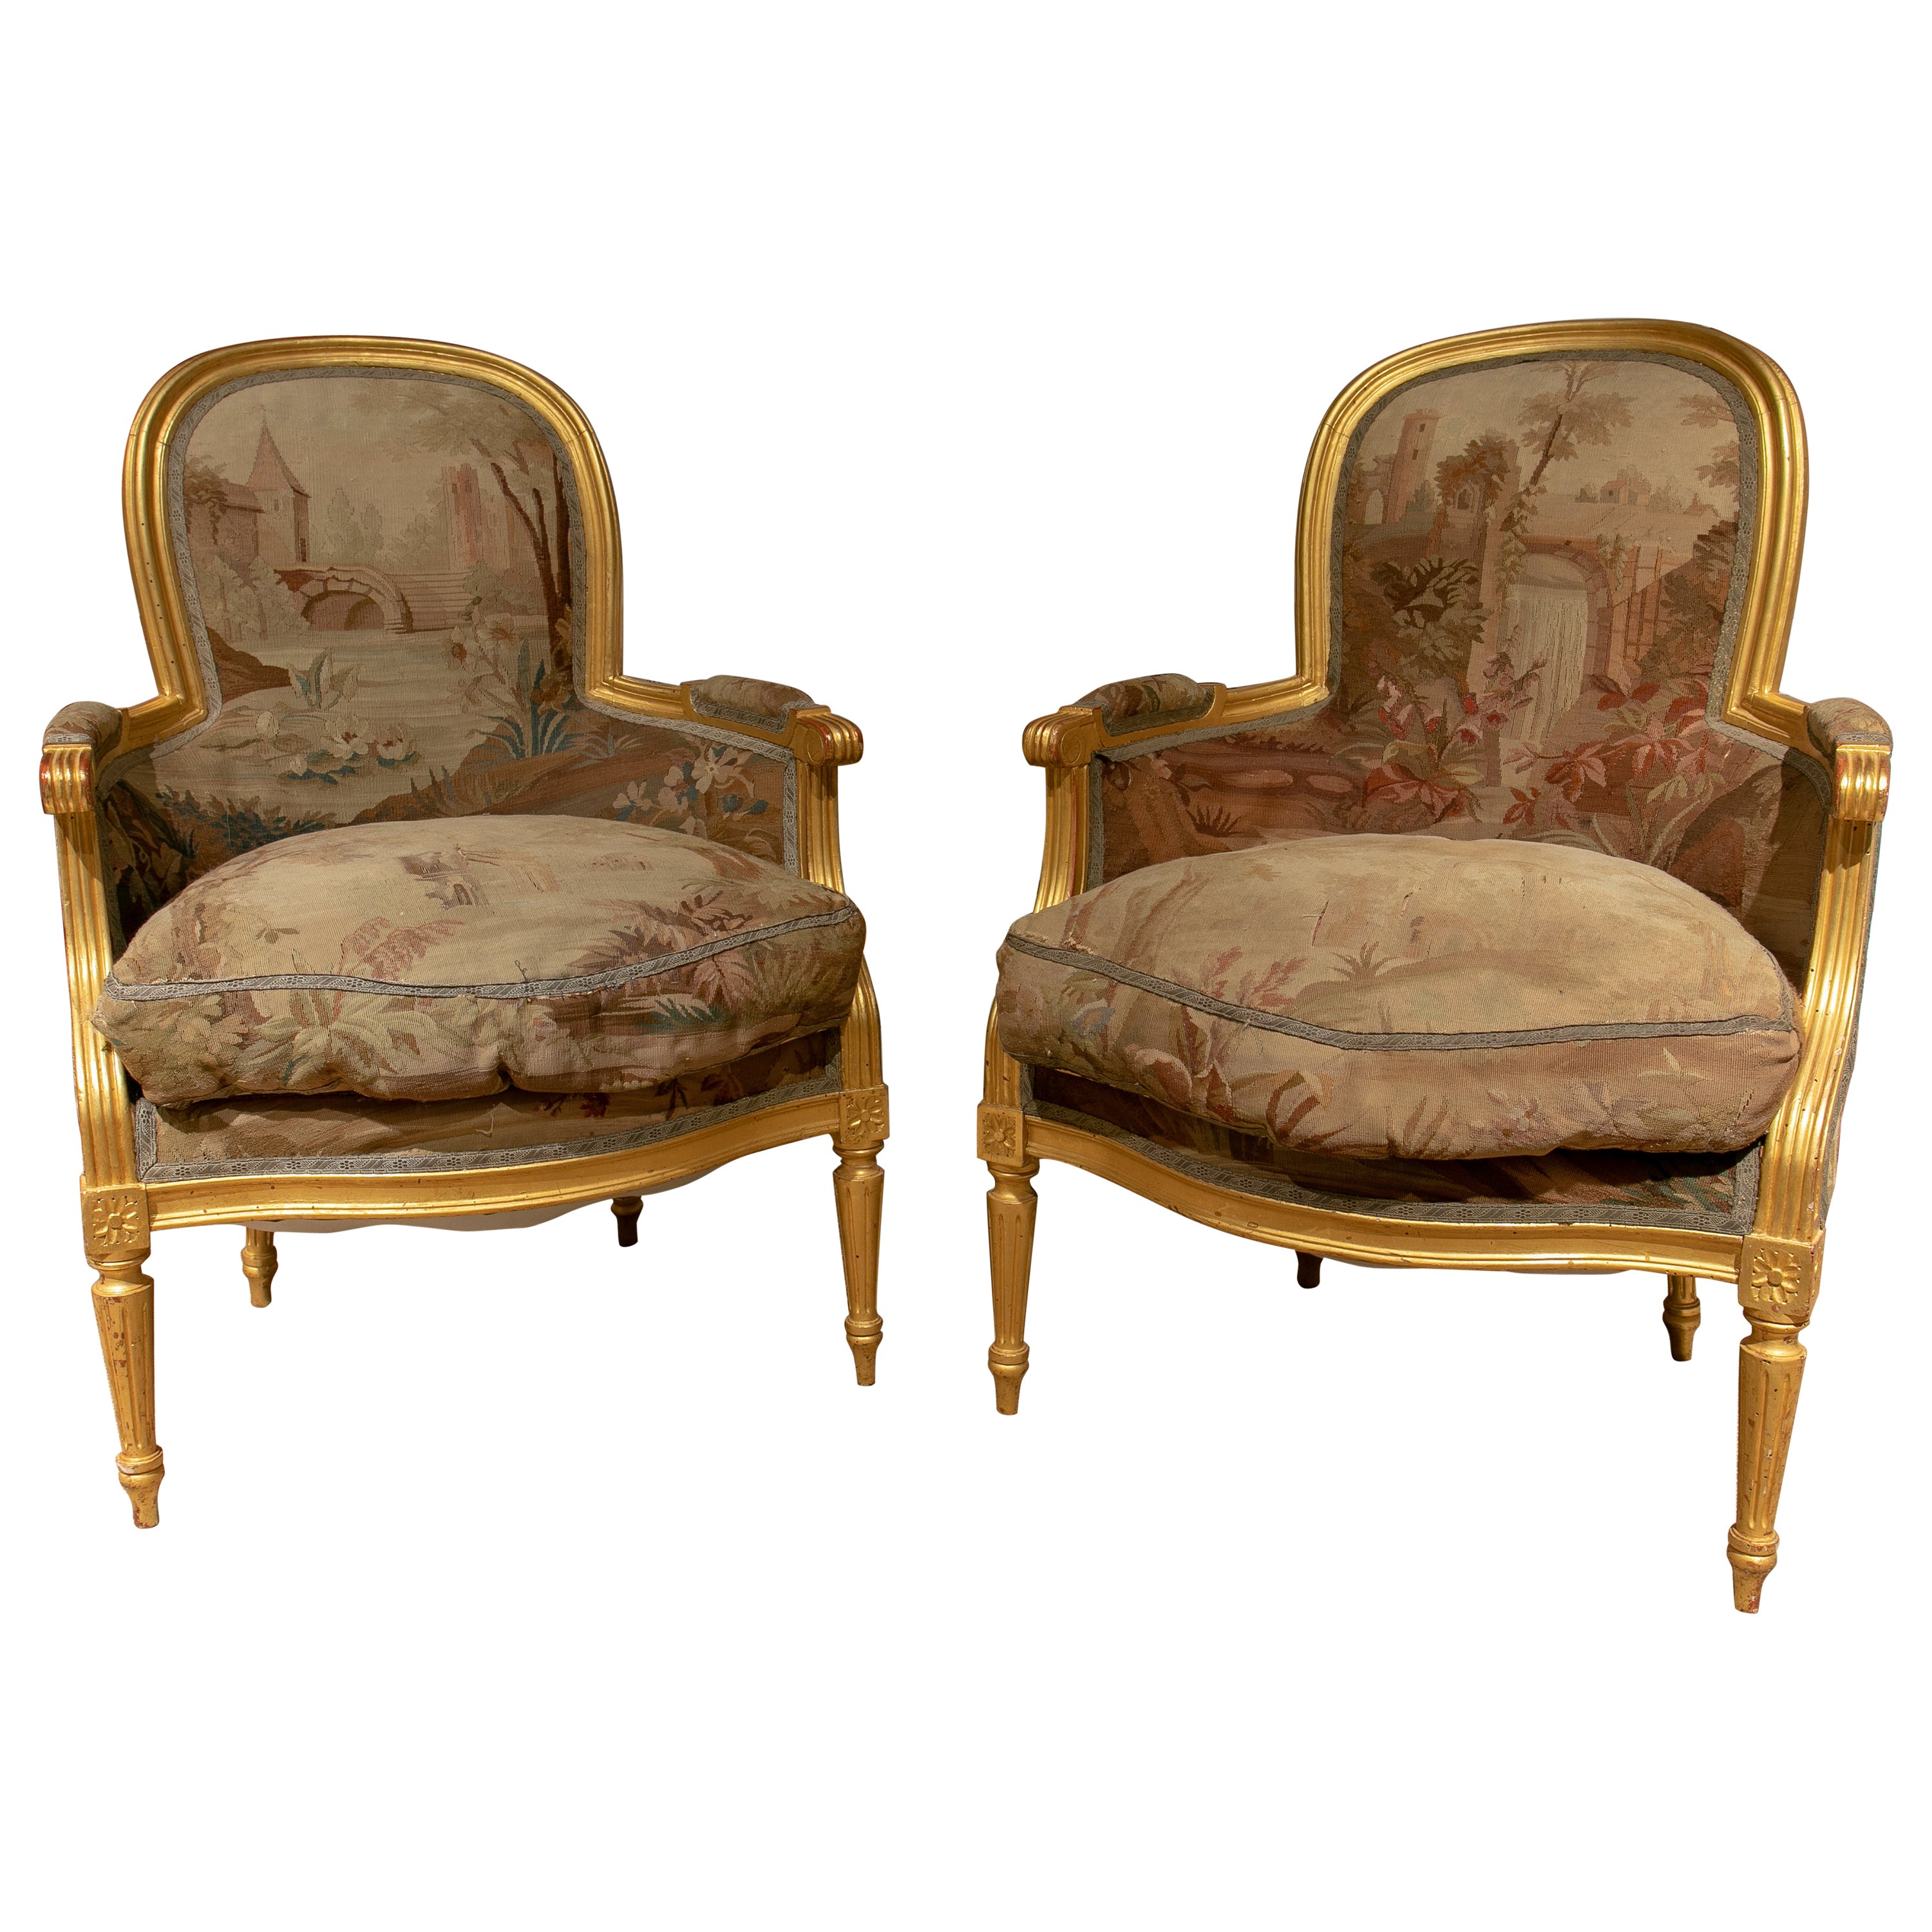 Pair of Mid-19th Century French Giltwood Armchairs W/ 18th Century Upholstery